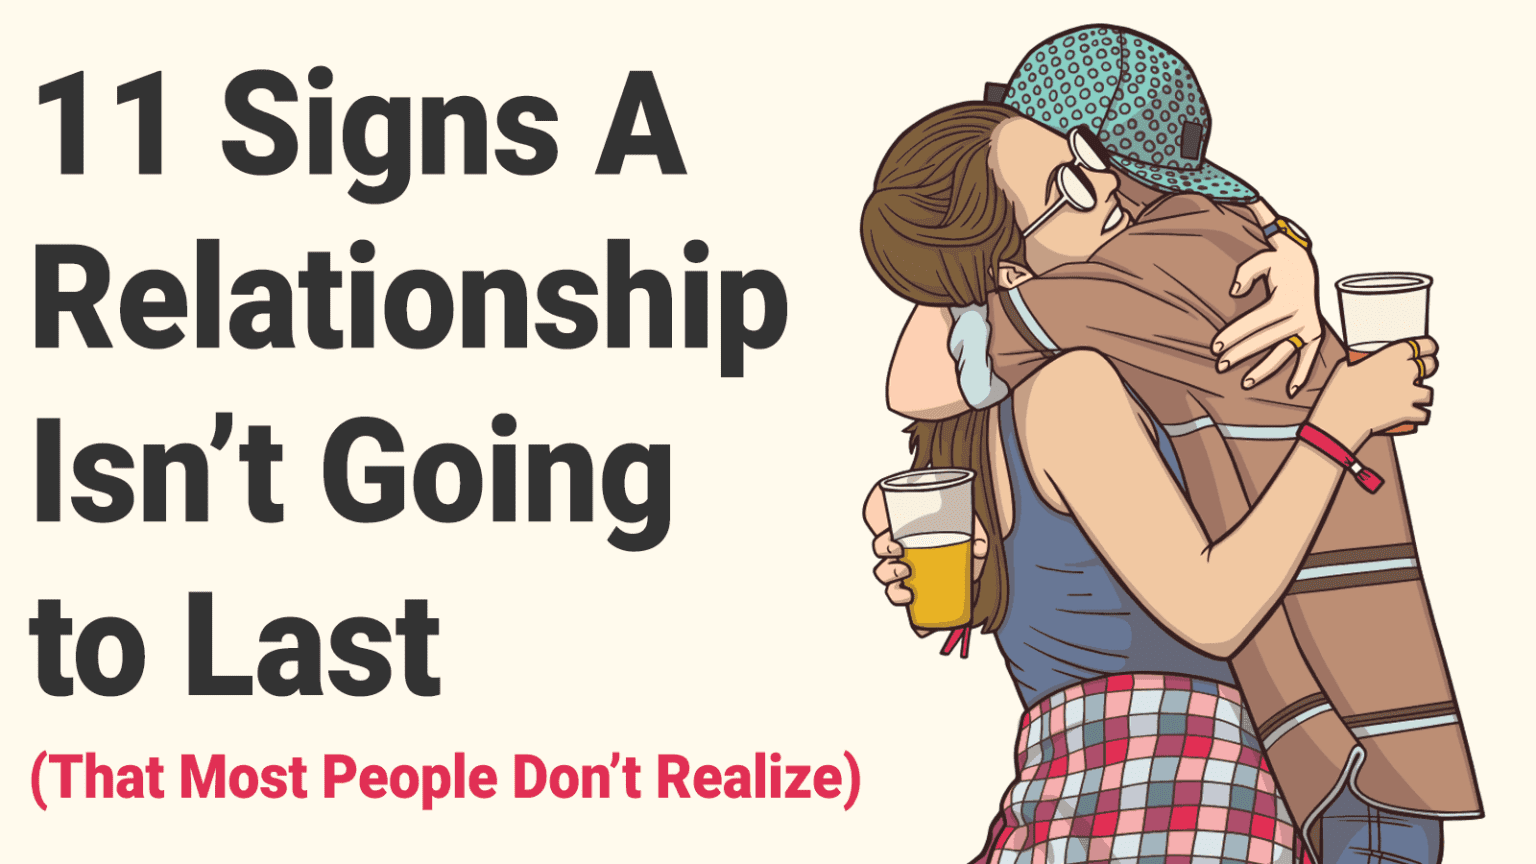 11 Signs A Relationship Isn't Going to Last (That Most People Don't ...